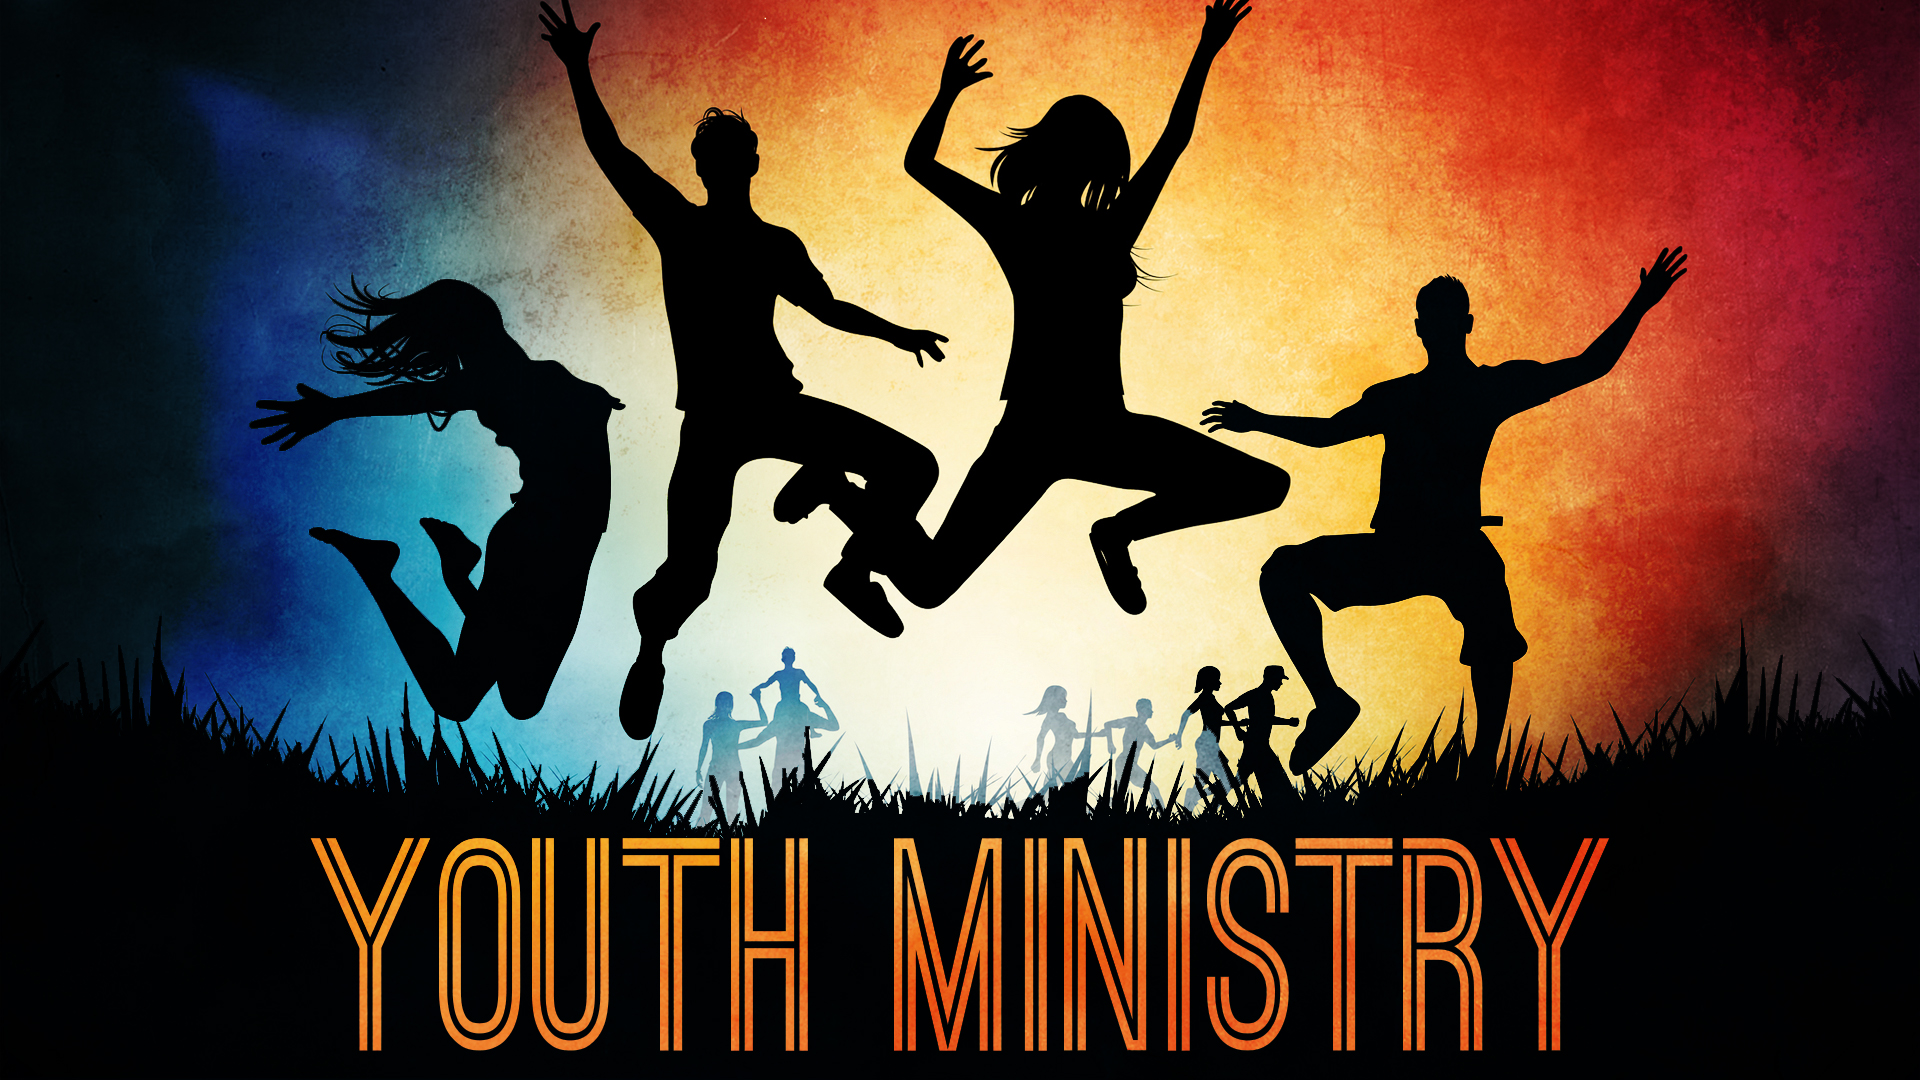 Youth Ministry Backgrounds